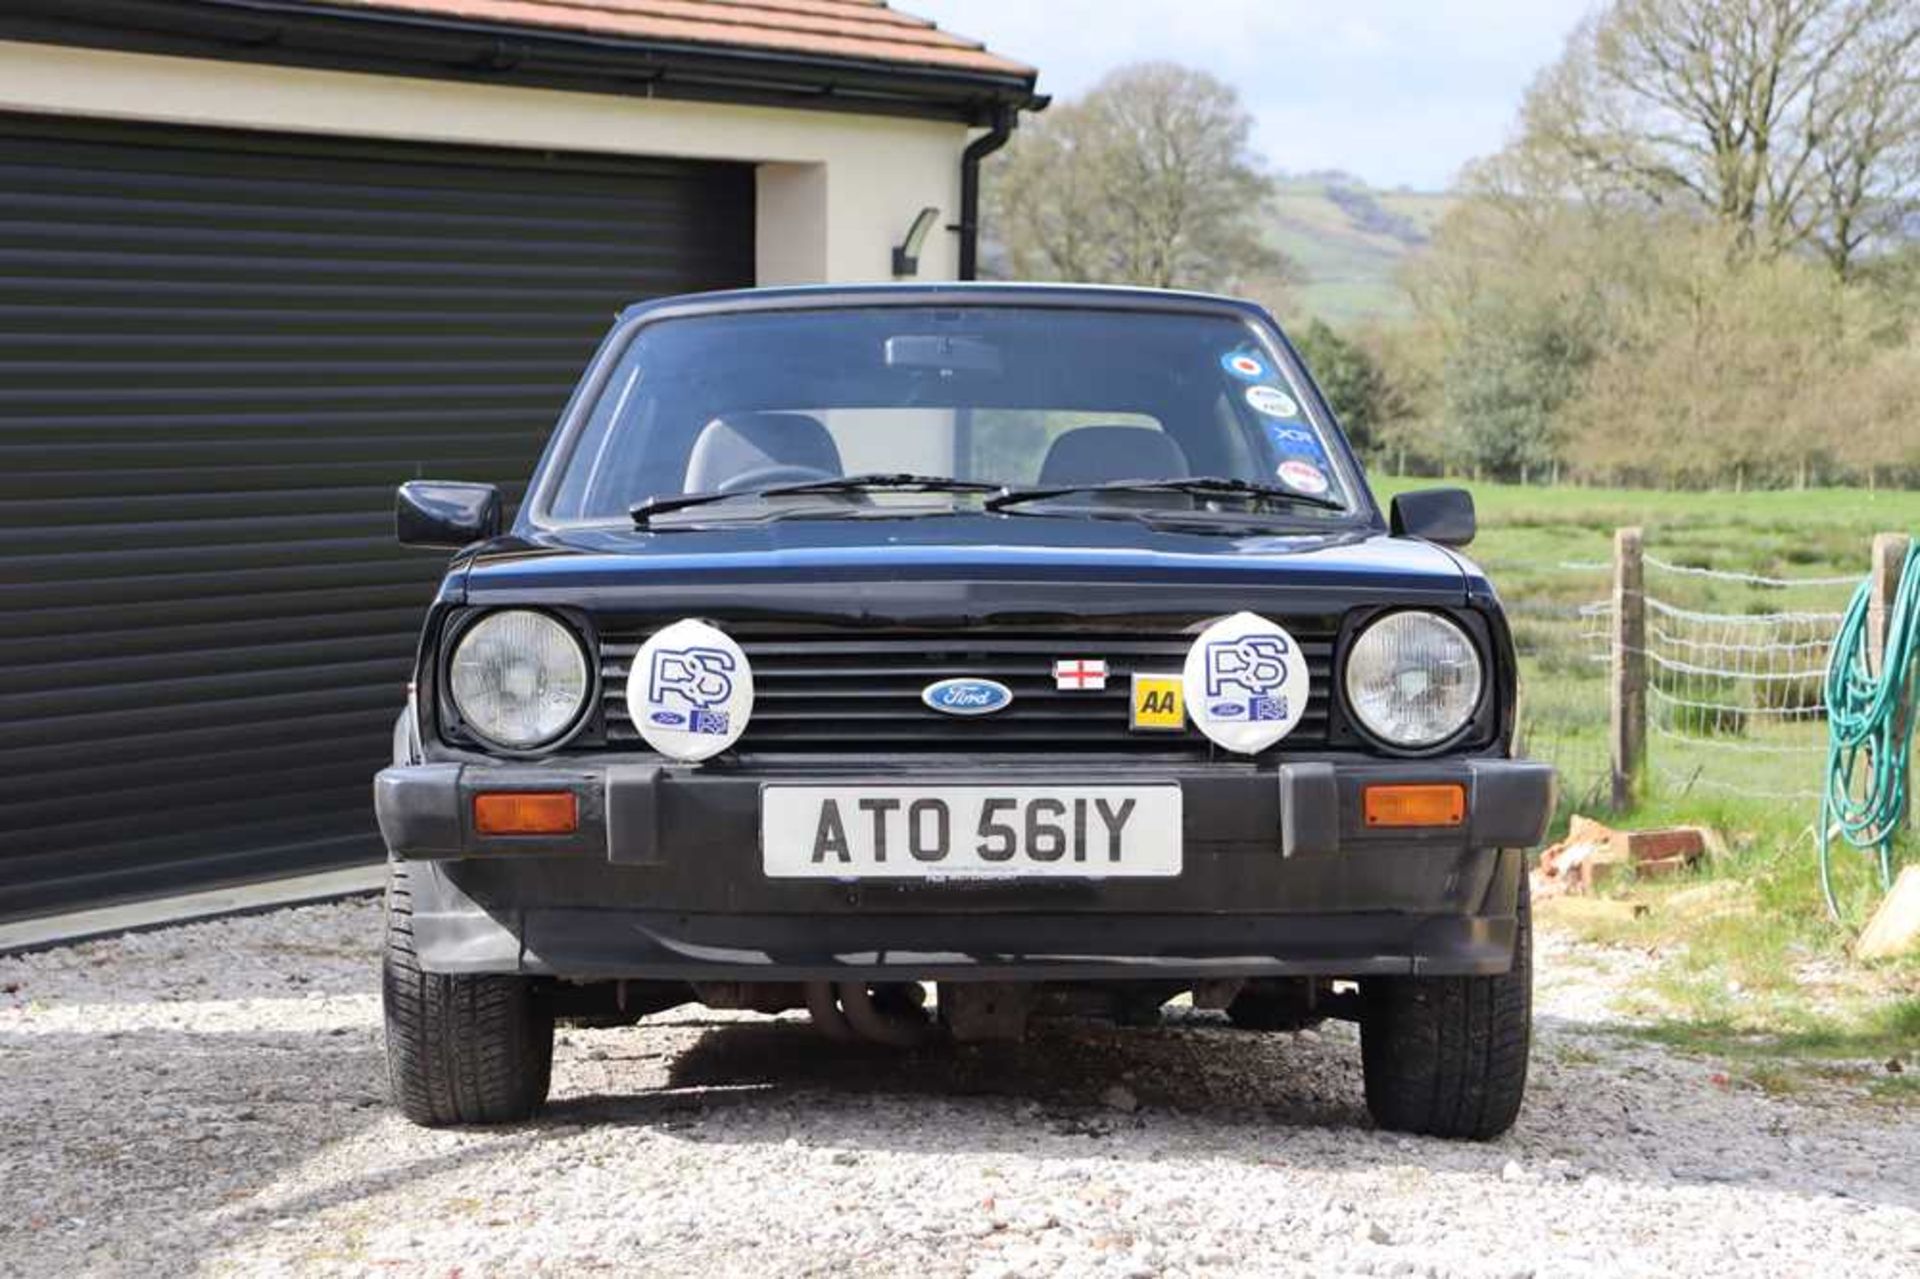 1983 Ford Fiesta XR2 - Image 4 of 56